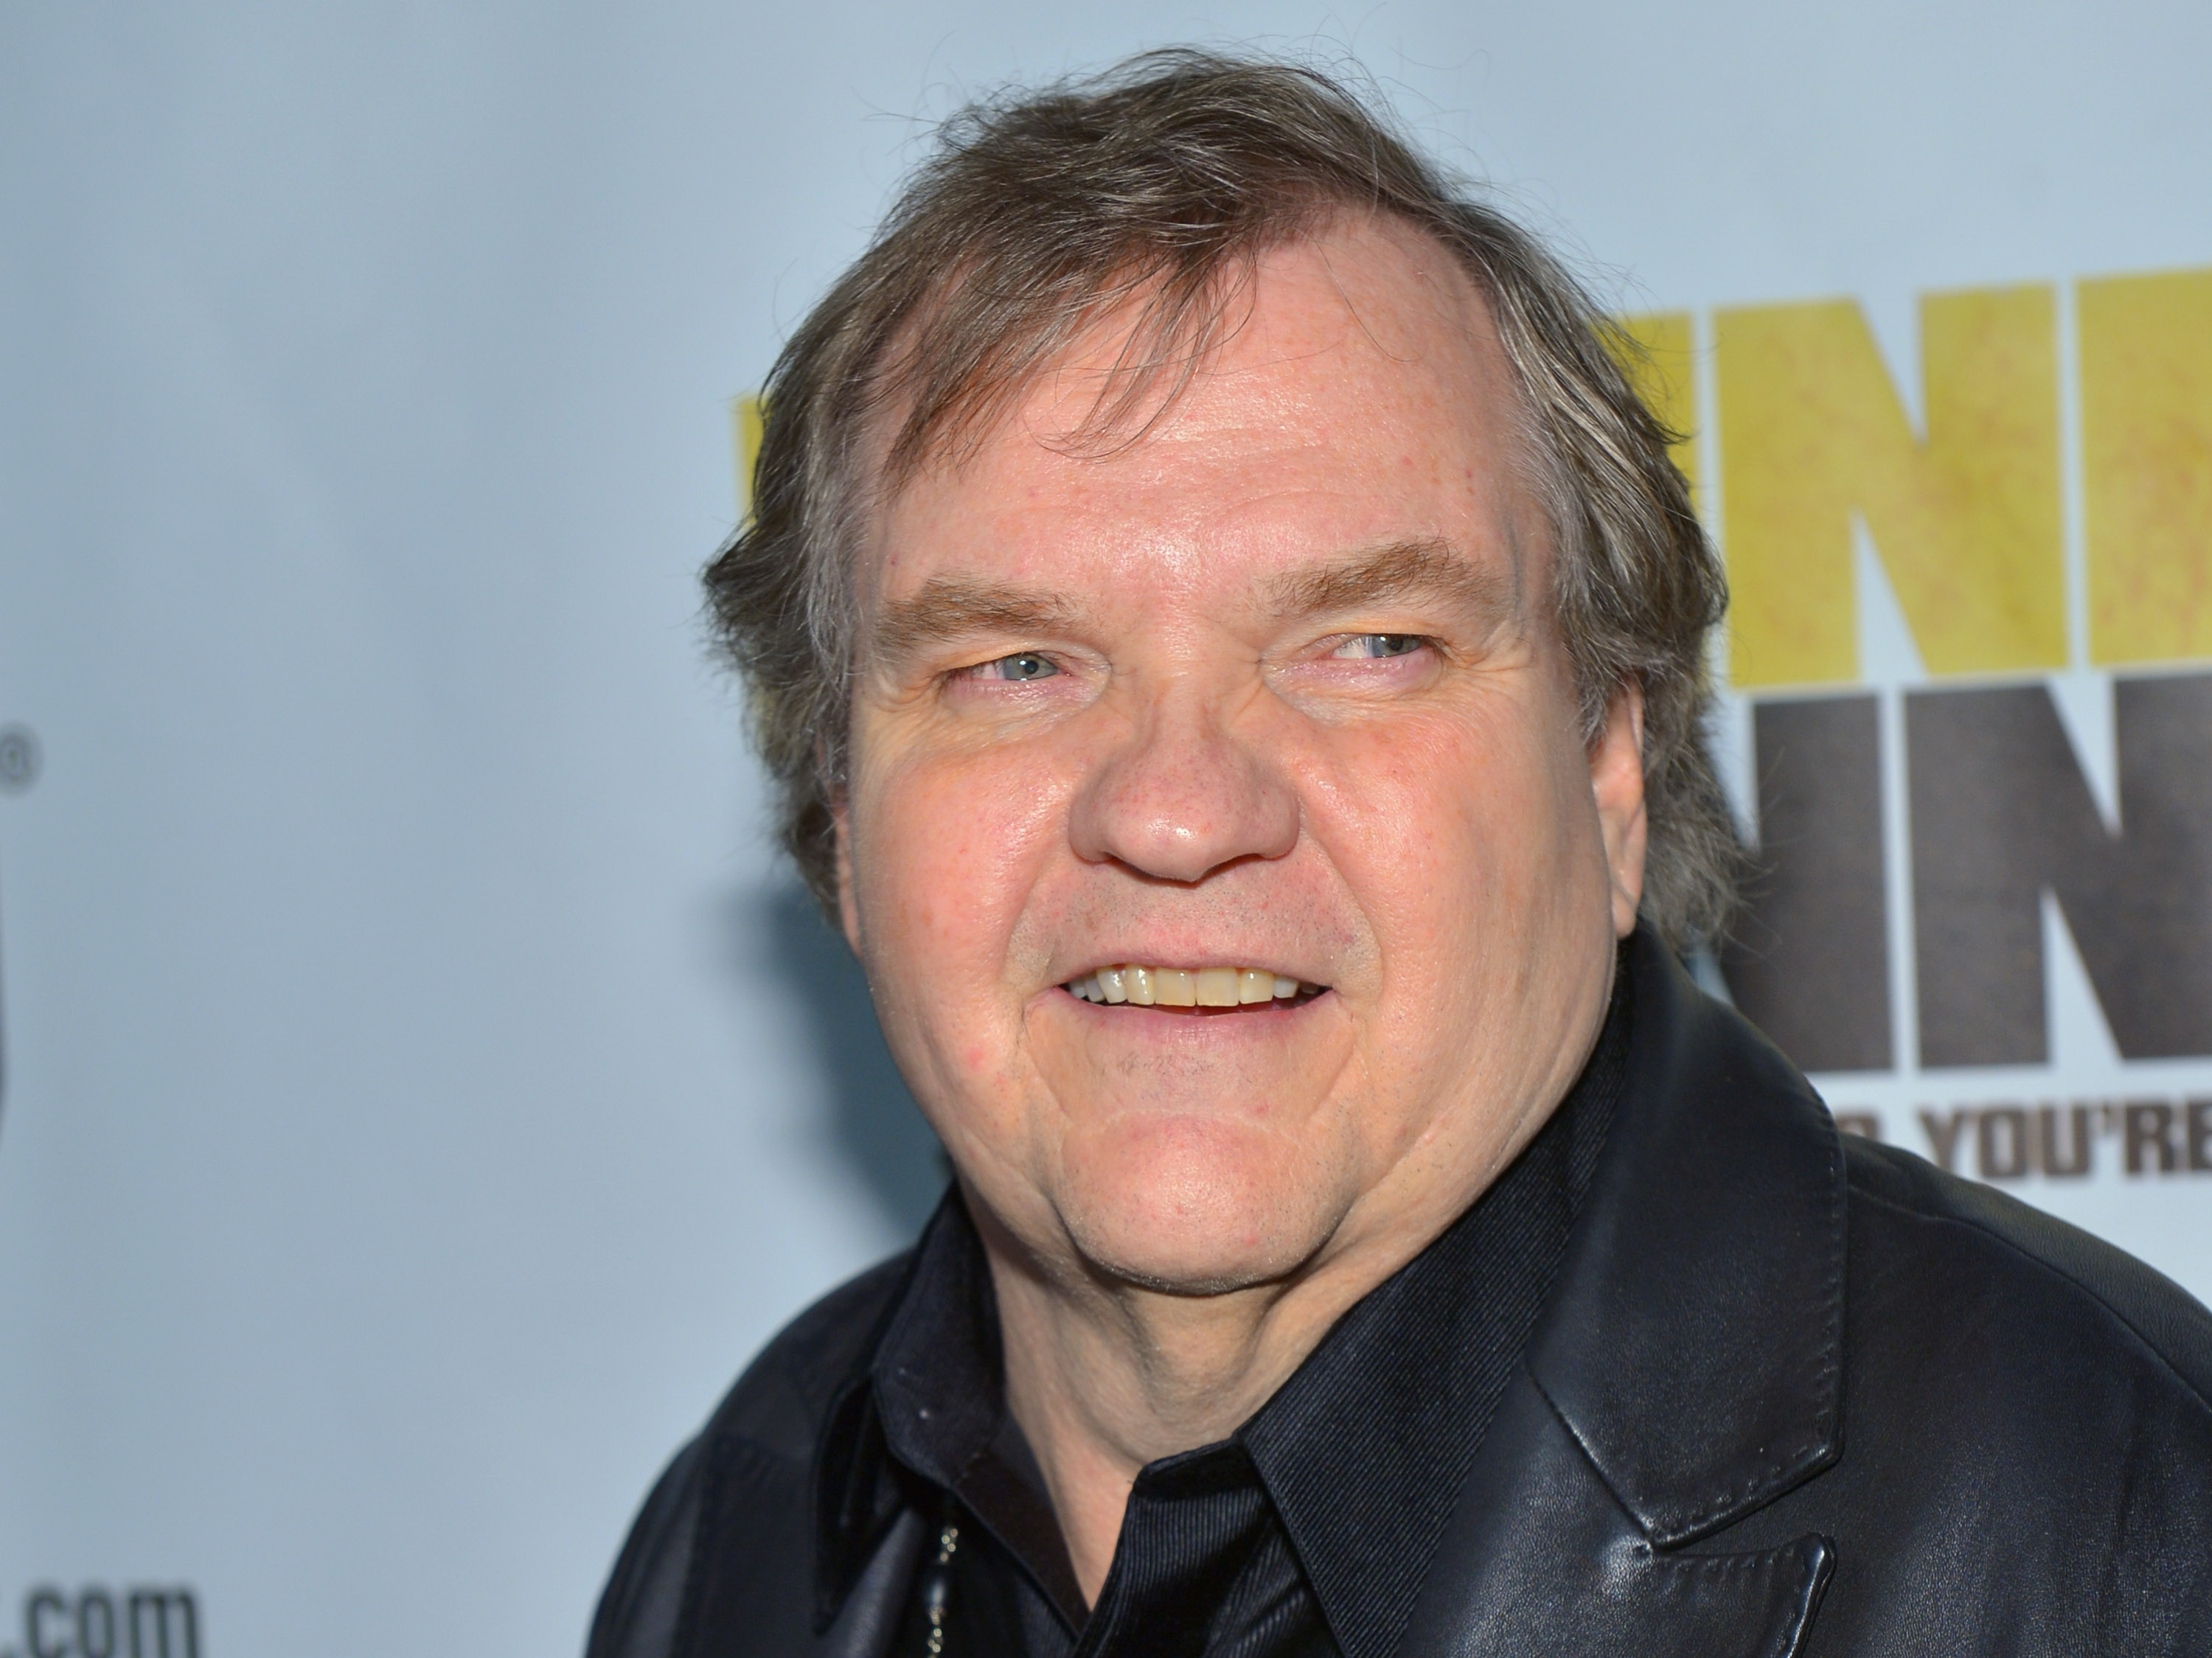 <p>Meat Loaf -- the man behind hits including "Bat Out of Hell," "Paradise by the Dashboard Light" and "I'd Do Anything for Love (But I Won't Do That)" -- died on Jan. 20, 2022, at 74. <a href="https://www.tmz.com/2022/01/21/meat-loaf-dead-dies-singer/">TMZ</a> reported that the Grammy winner and actor, who also appeared in dozens of movies including "The Rocky Horror Picture Show" and "Fight Club," died from complications of COVID-19; his rep has not commented on his cause of death. According to TMZ's sources, earlier in the week, the singer was planning to attend a business dinner for a show he's working on but it was canceled "because he became seriously ill with COVID," TMZ wrote, adding that its sources said Meat Loaf's condition rapidly turned critical. It's unknown if he was vaccinated. TMZ further reported that Meat Loaf (real name: Marvin Lee Aday) had recently been critical of vaccine mandates in Australia. In an August 2021 interview with the <a href="https://www.post-gazette.com/ae/music/2021/08/09/Meat-Loaf-Steel-City-Con-Pittsburgh-interview-Bat-Out-of-Hell-Jim-Steinman-2021/stories/202108090006">Pittsburgh Post-Gazette</a>, the star made comments critical of masks, adding, "If I die, I die, but I'm not going to be controlled." Upon learning of his death, Hollywood celebrities and fans <a href="https://www.wonderwall.com/celebrity/celebrities-react-to-meat-loafs-passing-549448.gallery">took to social media to remember the music and movie star</a>.</p><p>MORE: <a href="https://www.wonderwall.com/celebrity/celebrities-react-to-meat-loafs-passing-549448.gallery">Hollywood reacts to the death of Meat Loaf at 74</a></p>